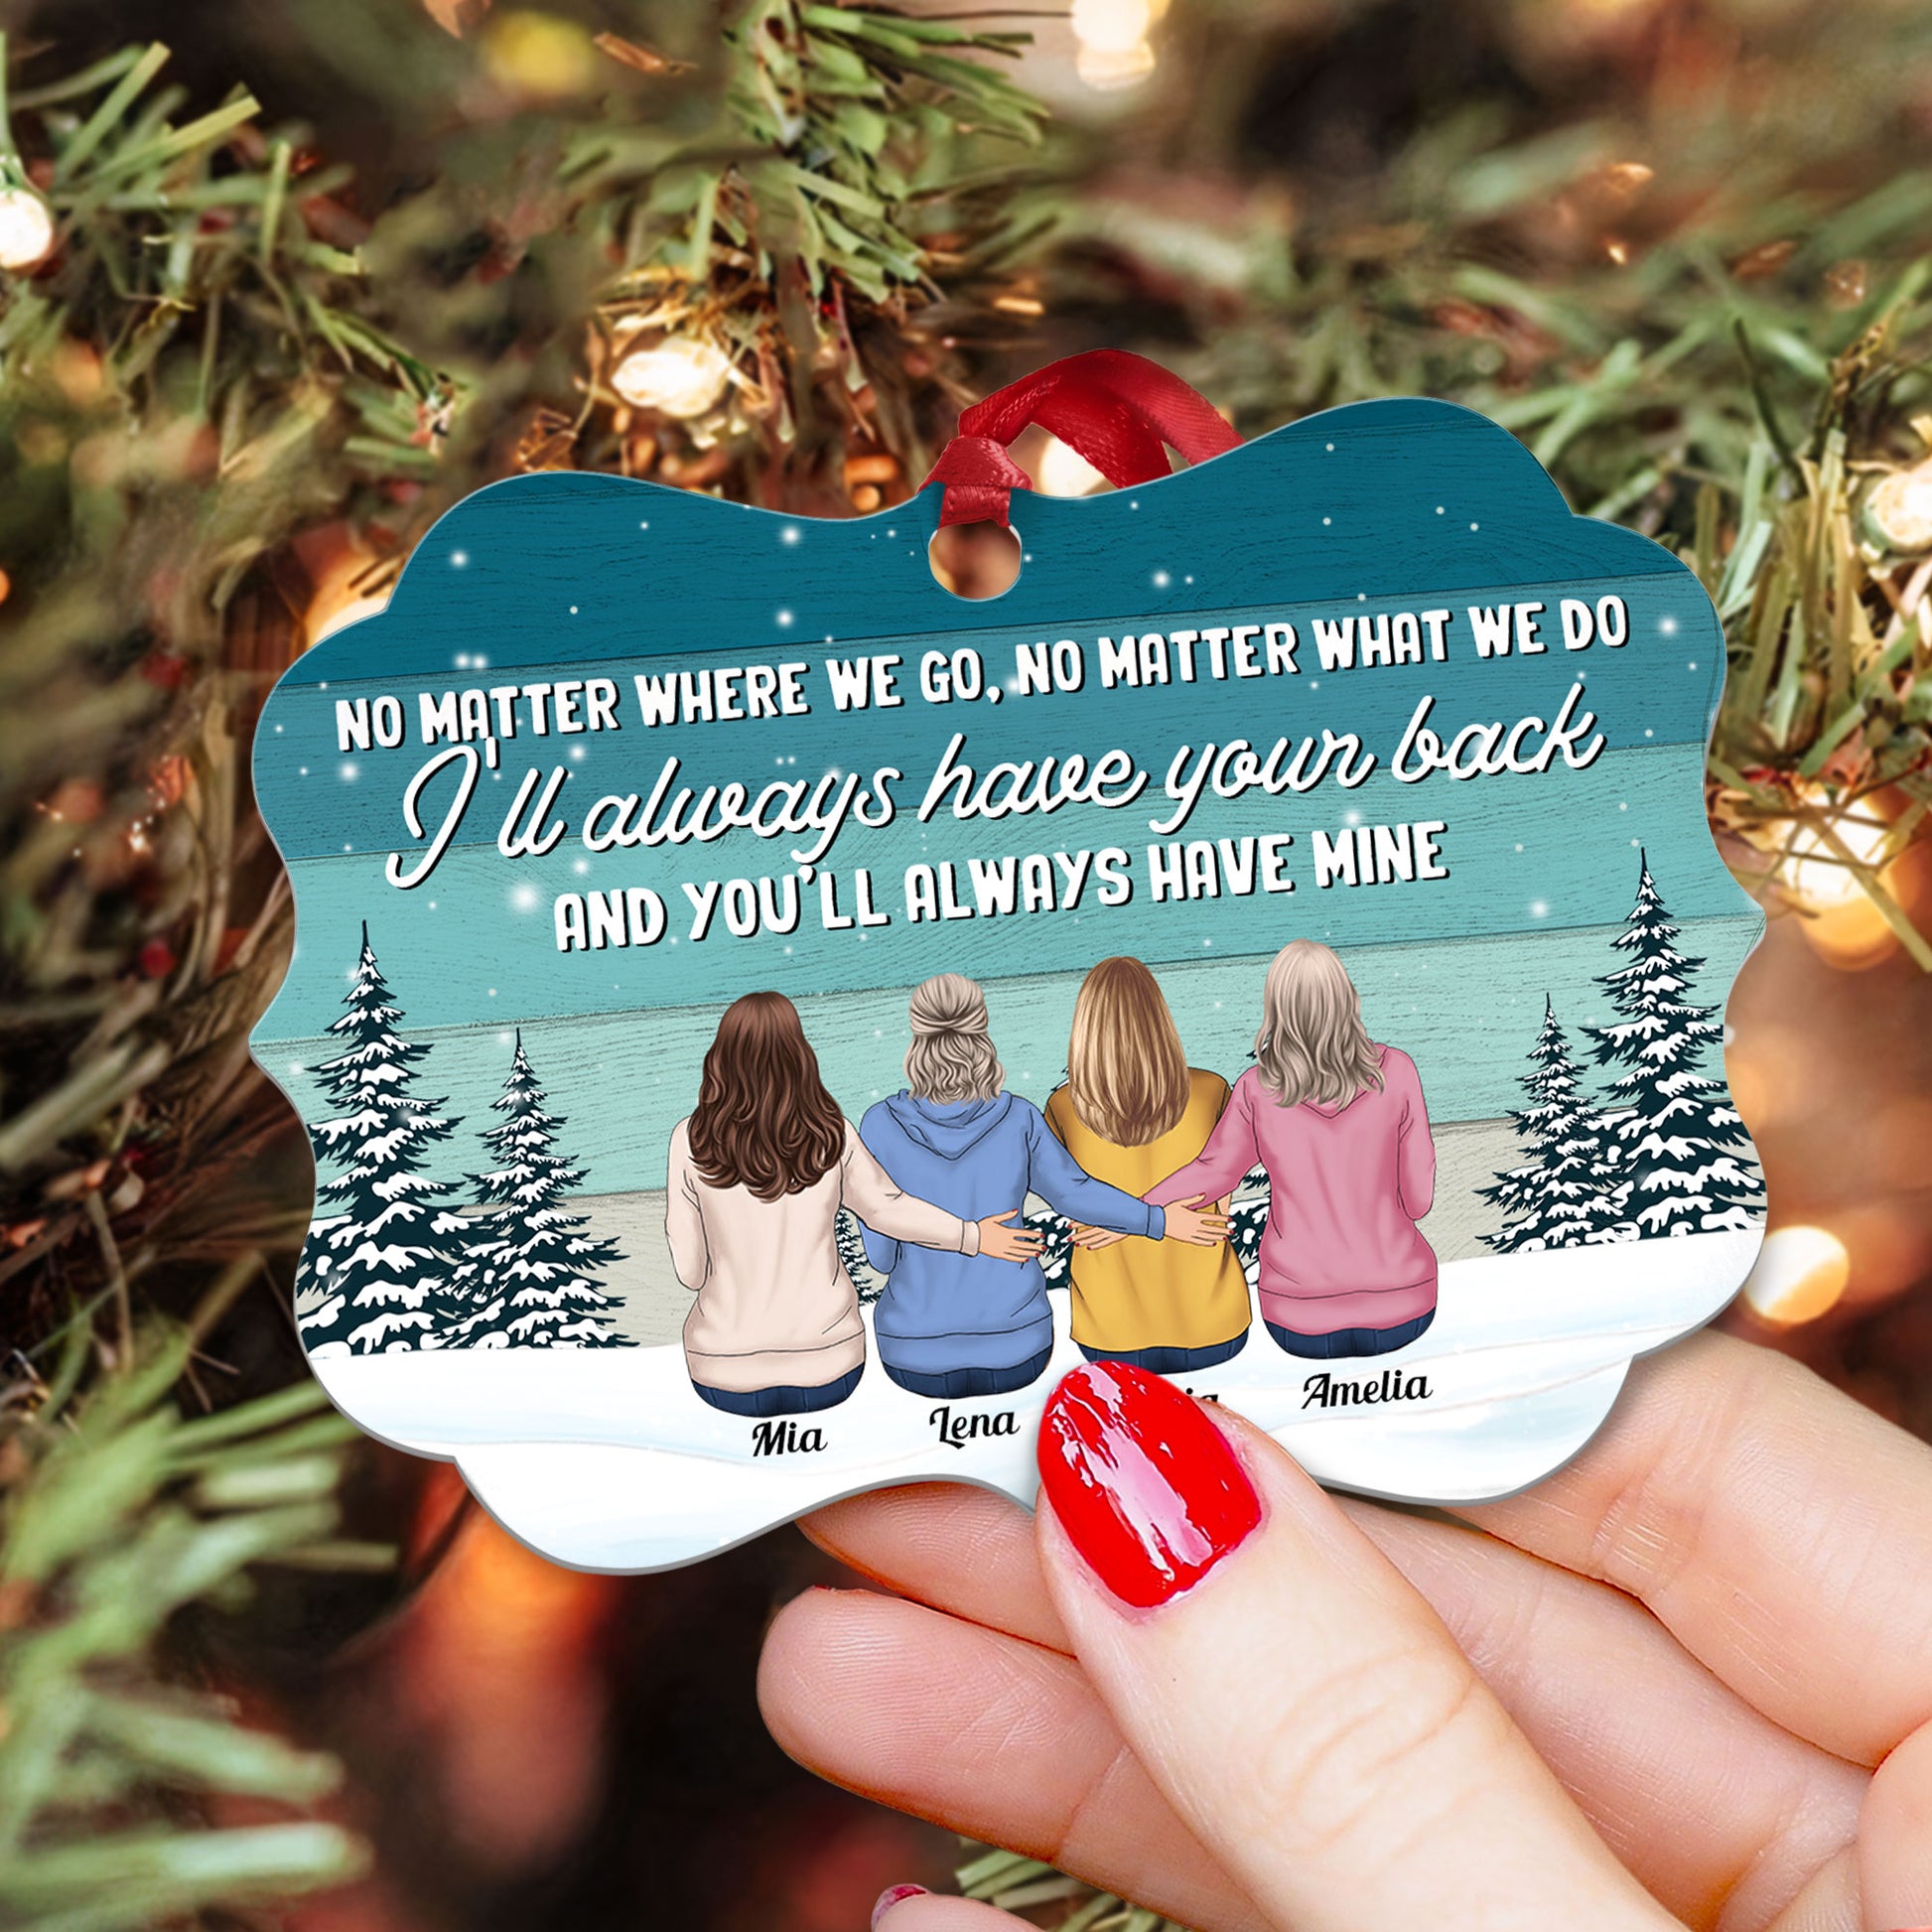 True Friends Always Have Each Other Back - Personalized Aluminum Ornament - Christmas Gift For Friends, Besties